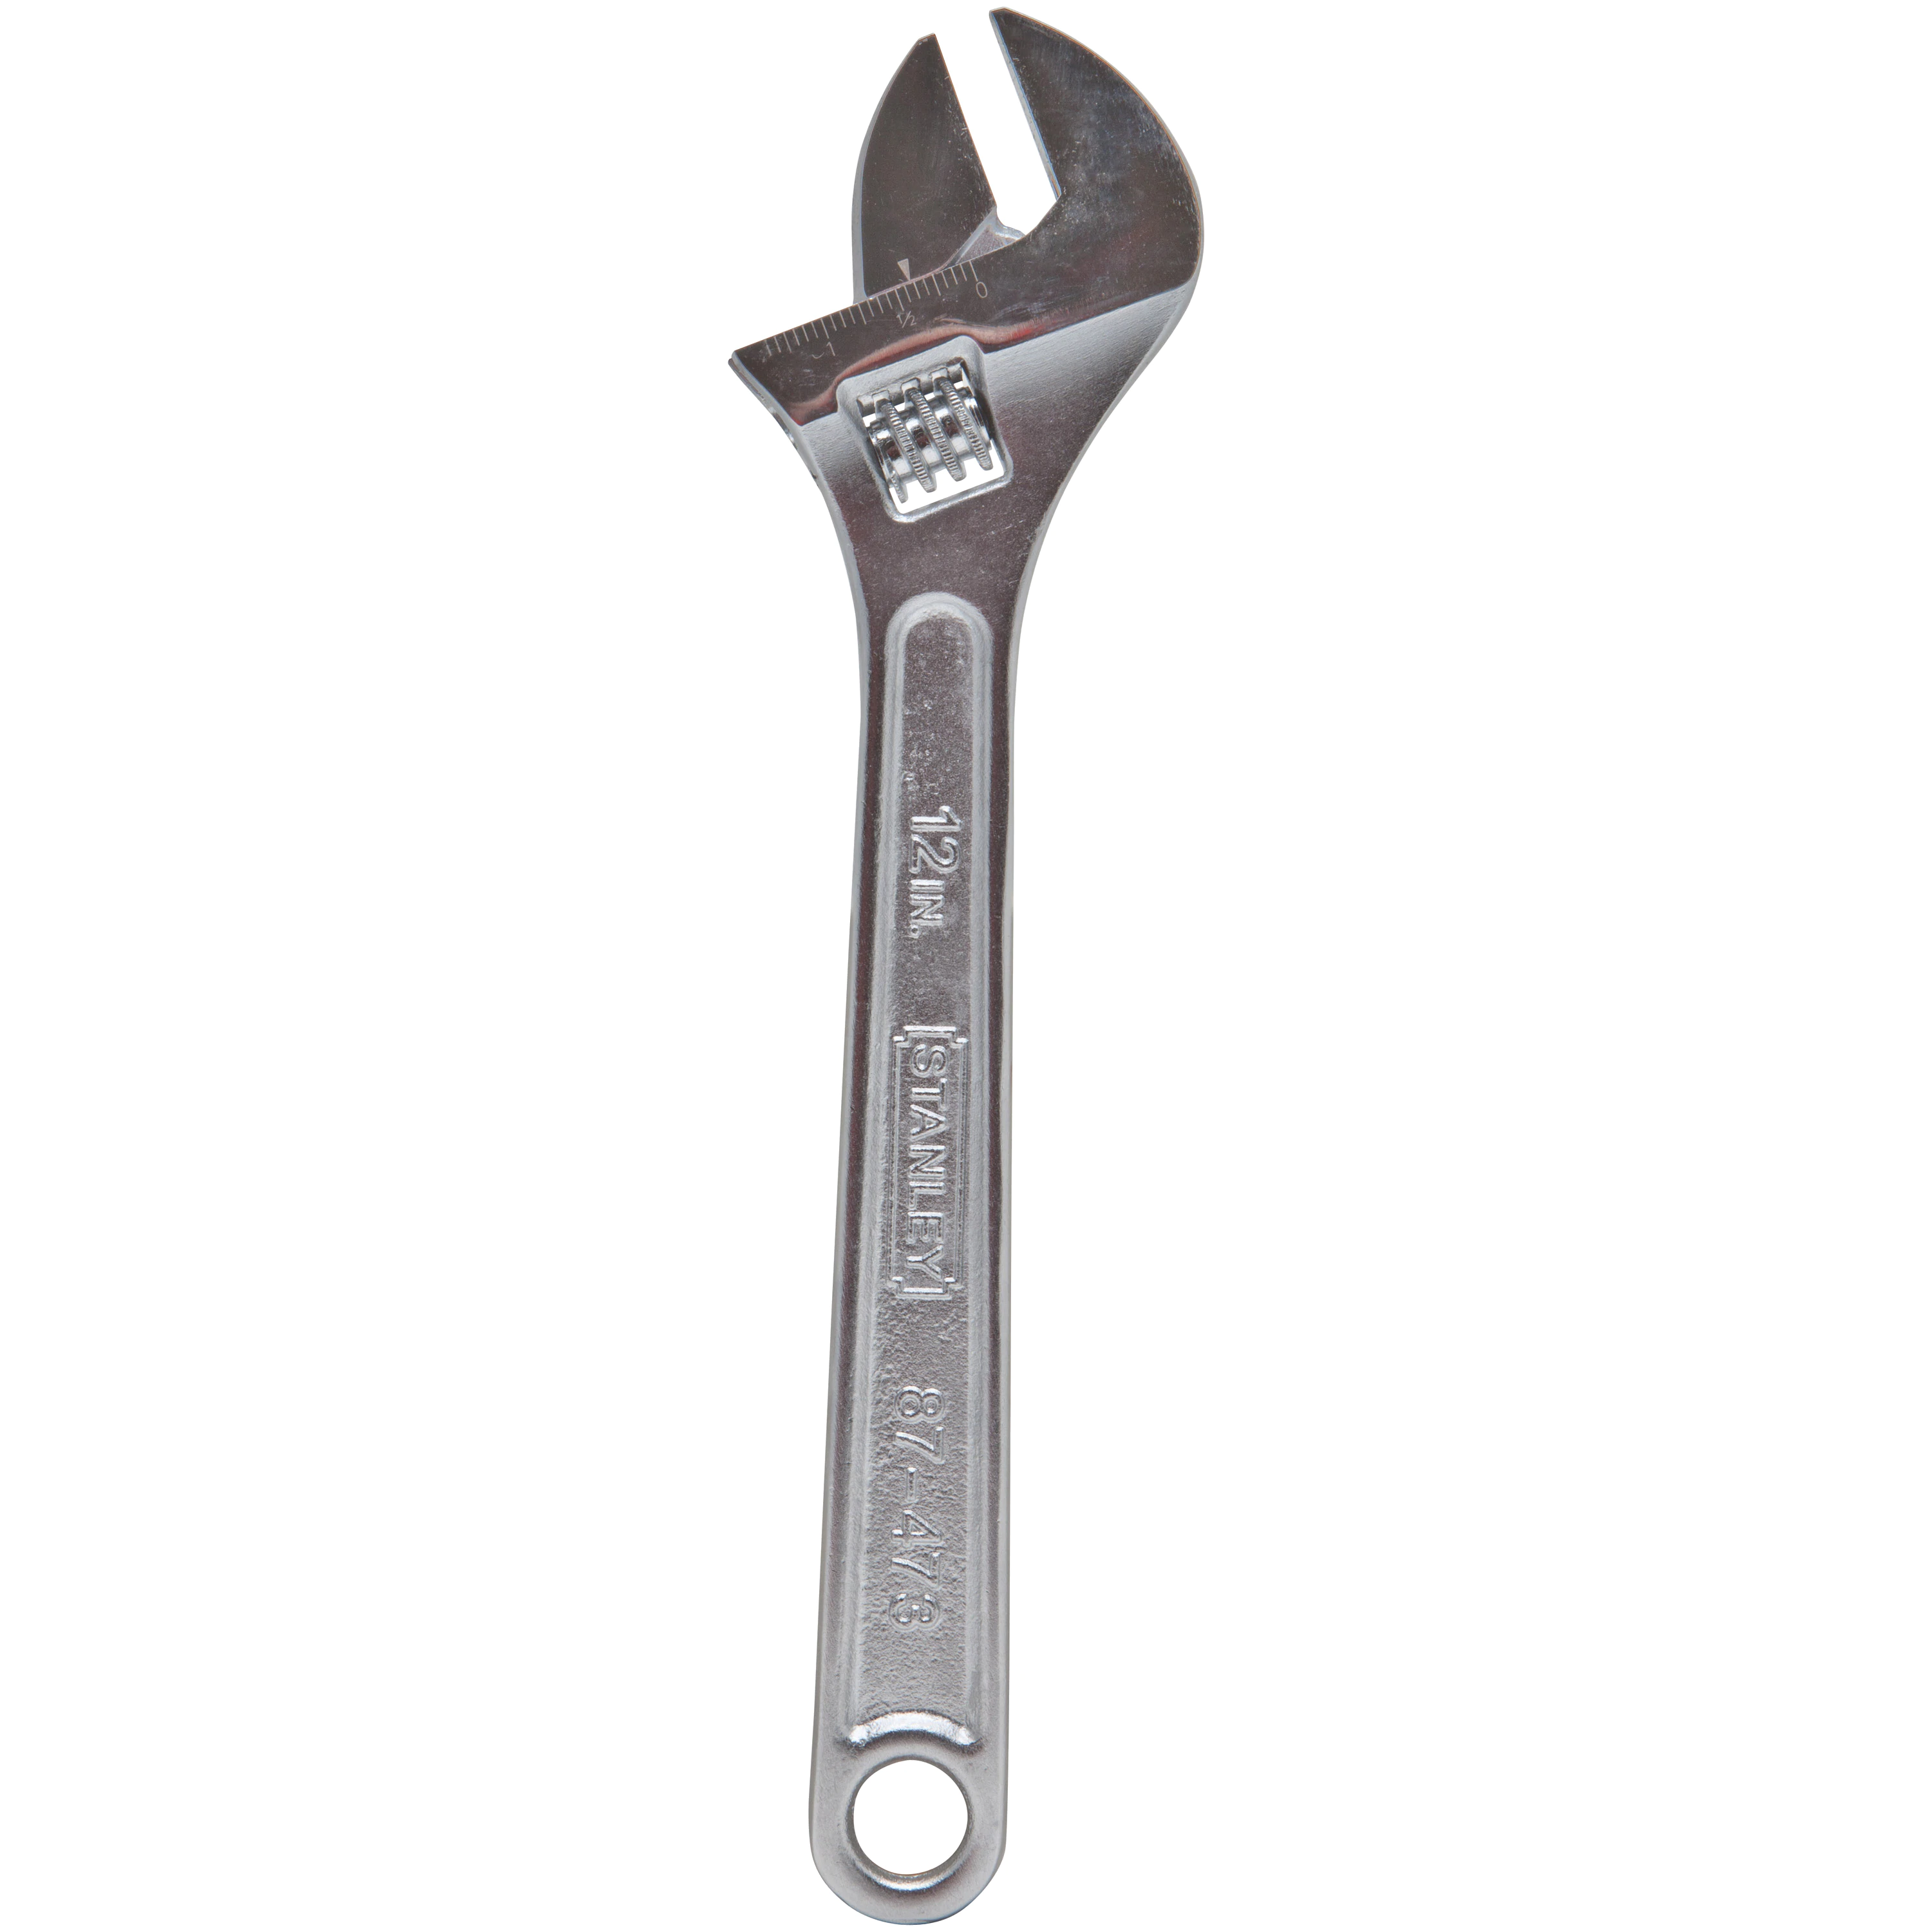 Stanley® Adjustable Wrench 200mm 87-432-1-23